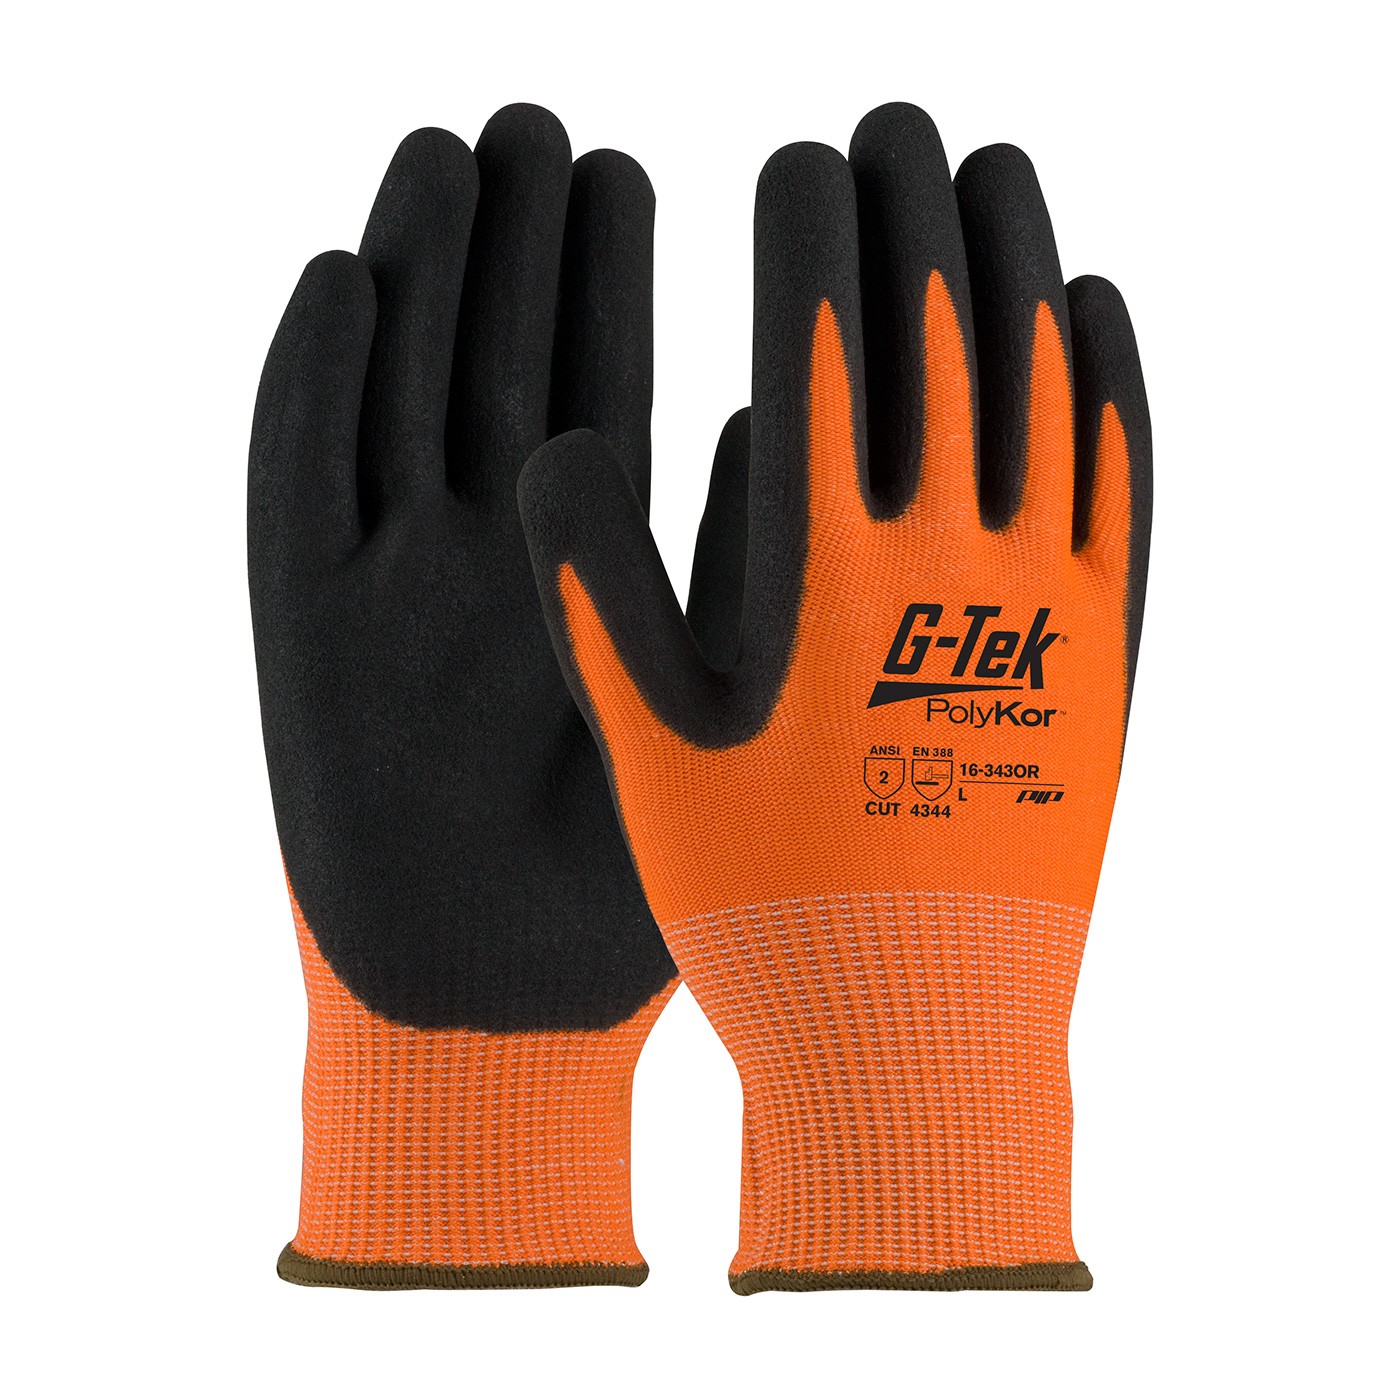 G-Tek® PolyKor® Hi-Vis Seamless Knit PolyKor® Blended Glove with Double-Dipped Nitrile Coated MicroSurface Grip on Palm & Fingers  (#16-343OR)